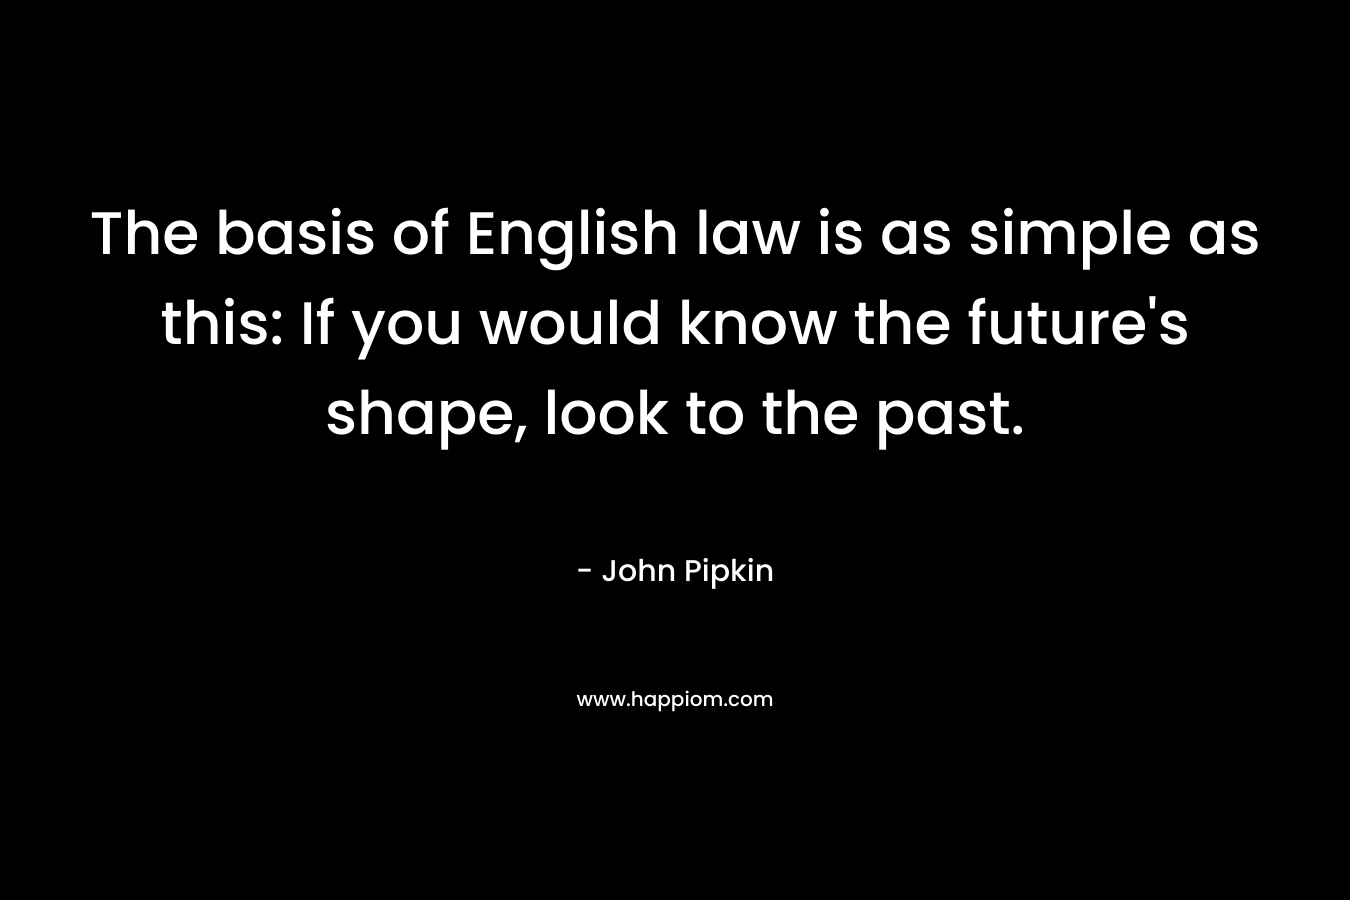 The basis of English law is as simple as this: If you would know the future’s shape, look to the past. – John Pipkin